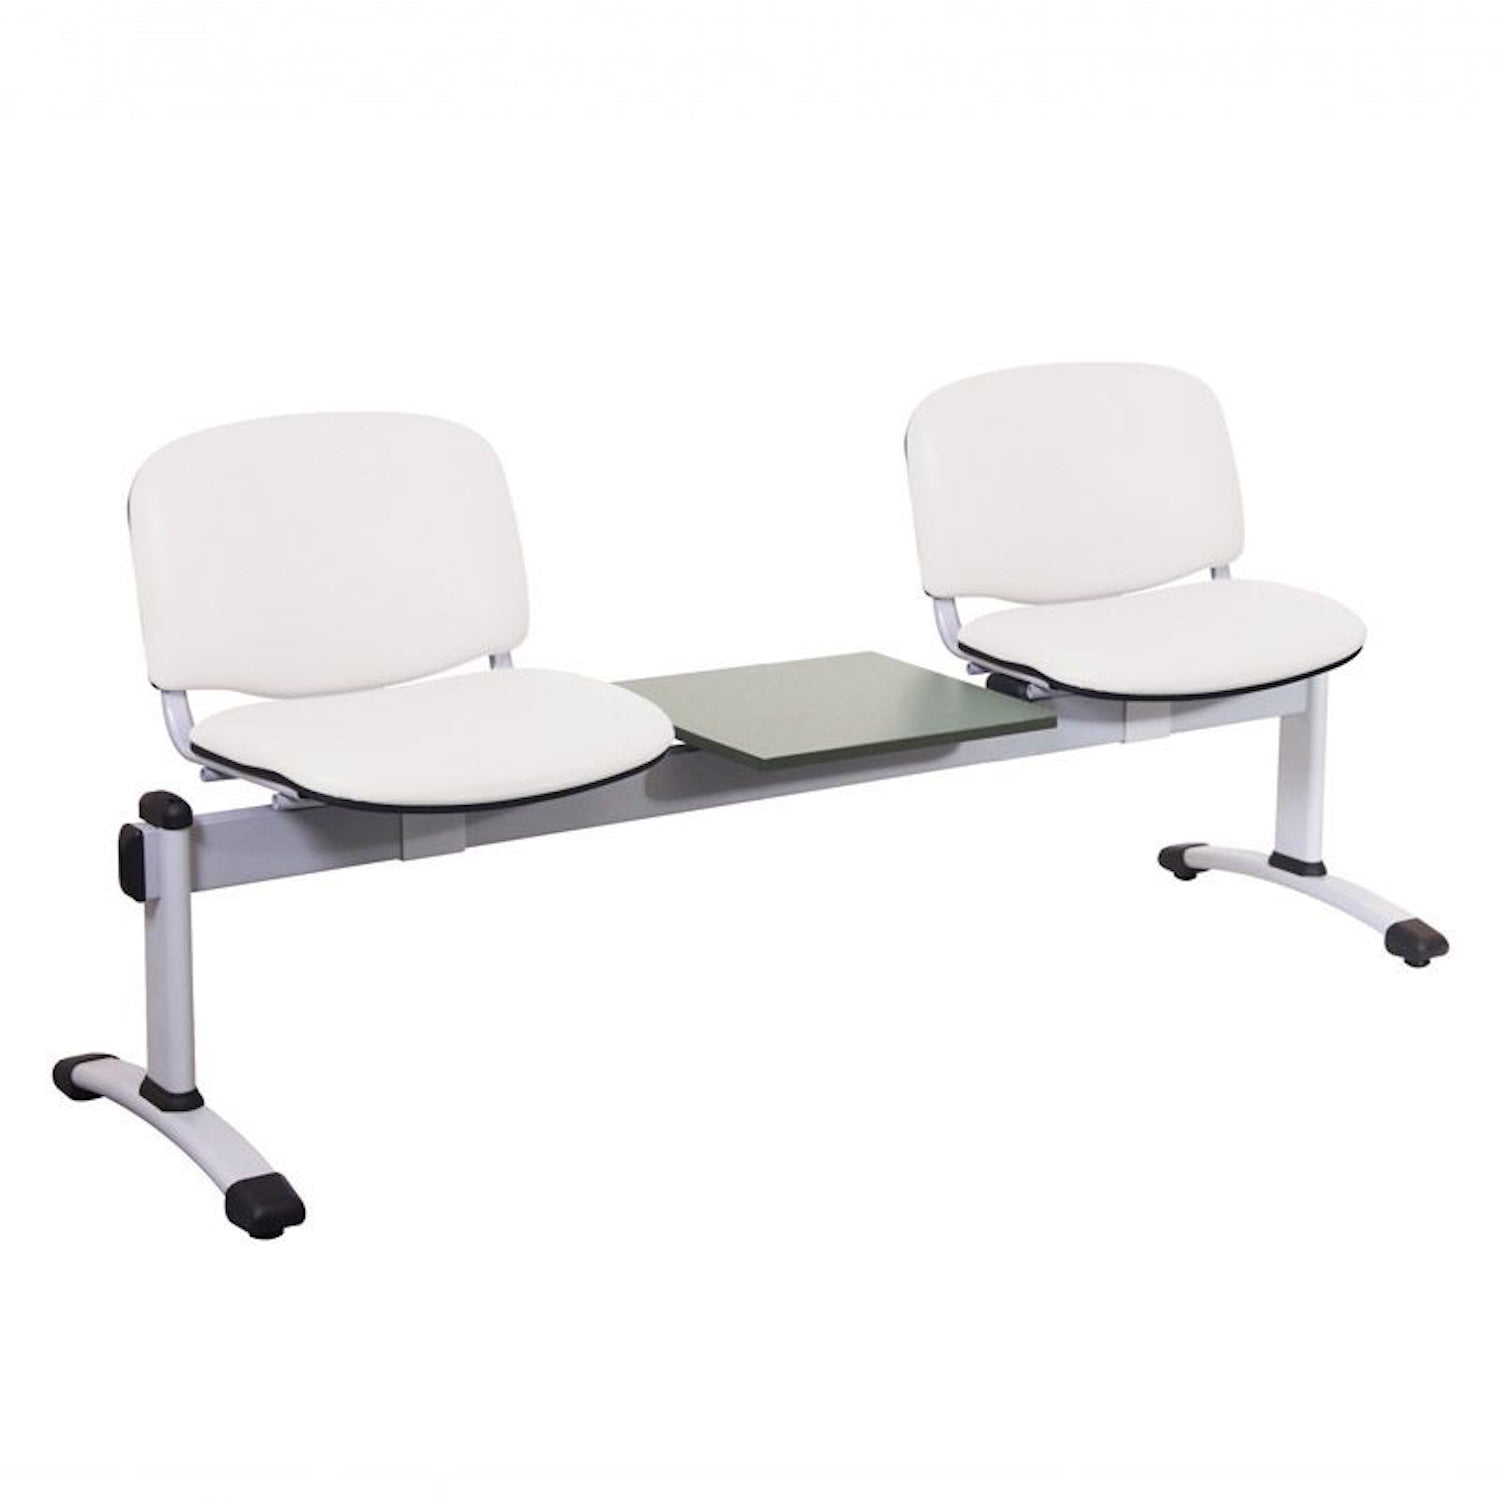 Sunflower Visitor 2 Anti-bacterial Vinyl Upholstery Seats & 1 Table Module in White